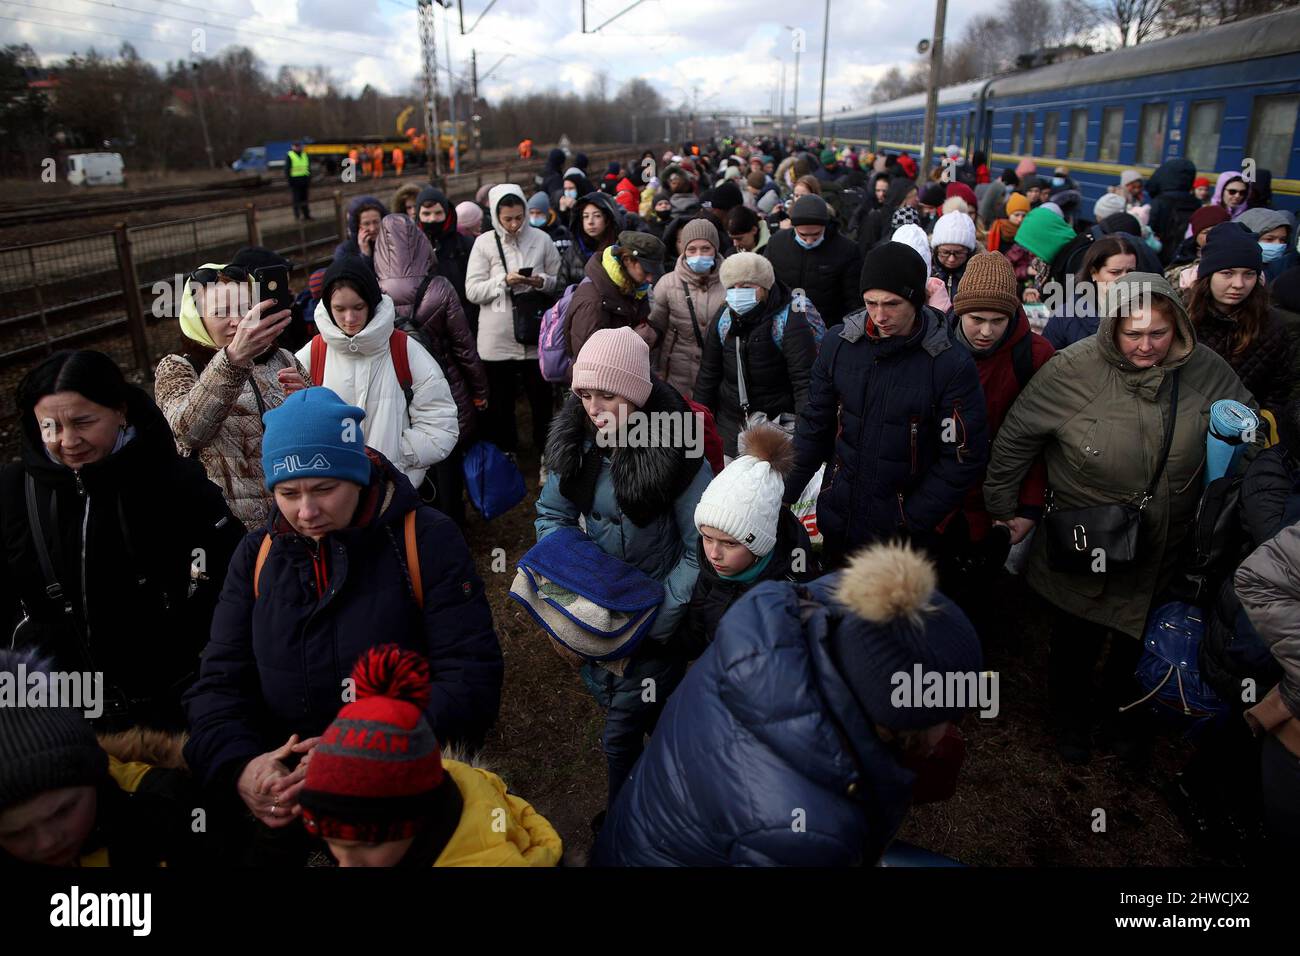 Olkusz, Poland. 28th Feb, 2022. Ukrainian refugees seen at Olkusz train station. Over 700,000 Ukrainian people seek refuge in Poland as result of Russiaís aggression on their country. Many of them come to Polish cities by train, where humanitarian help is organized for those in need. (Photo by Vito Corleone/SOPA Images/Sipa USA) Credit: Sipa USA/Alamy Live News Stock Photo